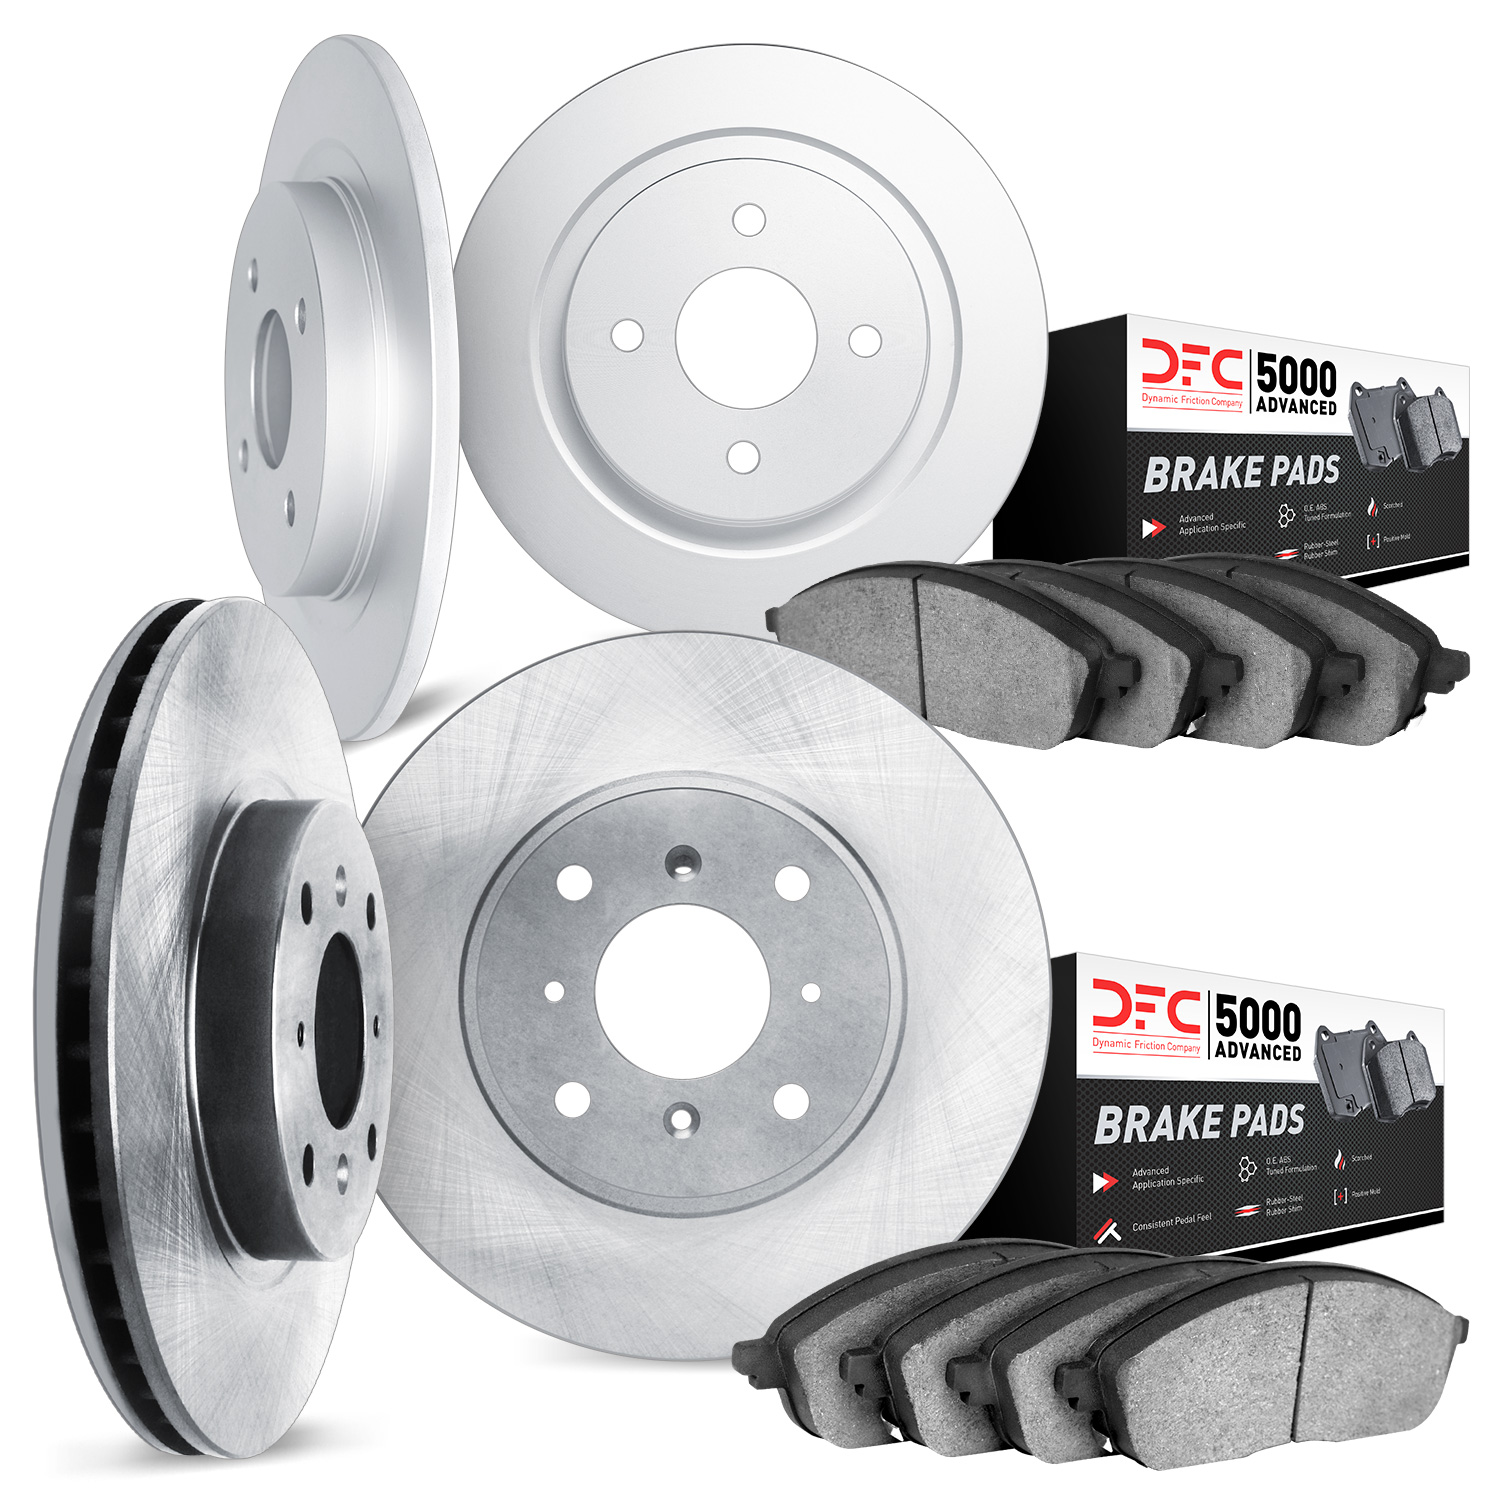 6504-72099 Brake Rotors w/5000 Advanced Brake Pads Kit, 1989-1993 Multiple Makes/Models, Position: Front and Rear